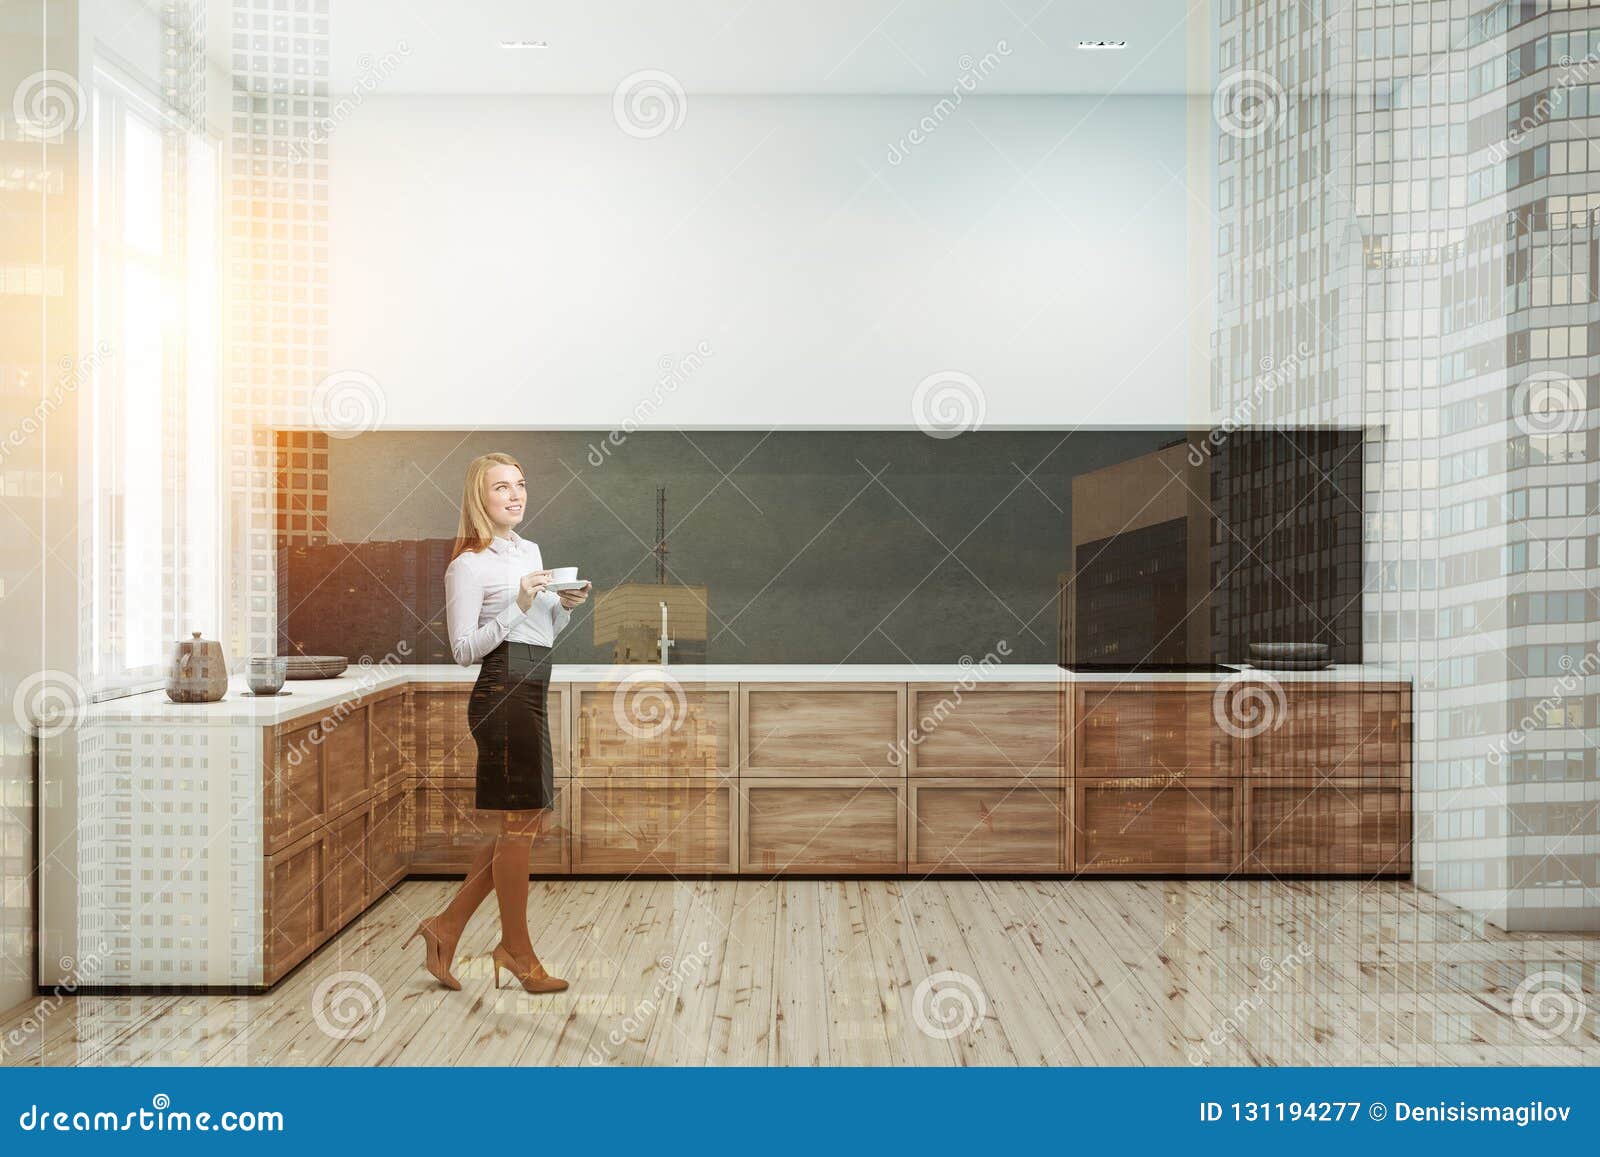 White And Gray Kitchen Wooden Counter Woman Stock Image Image Of Contemporary Appliances 131194277,Modern Front Door Wreath Ideas